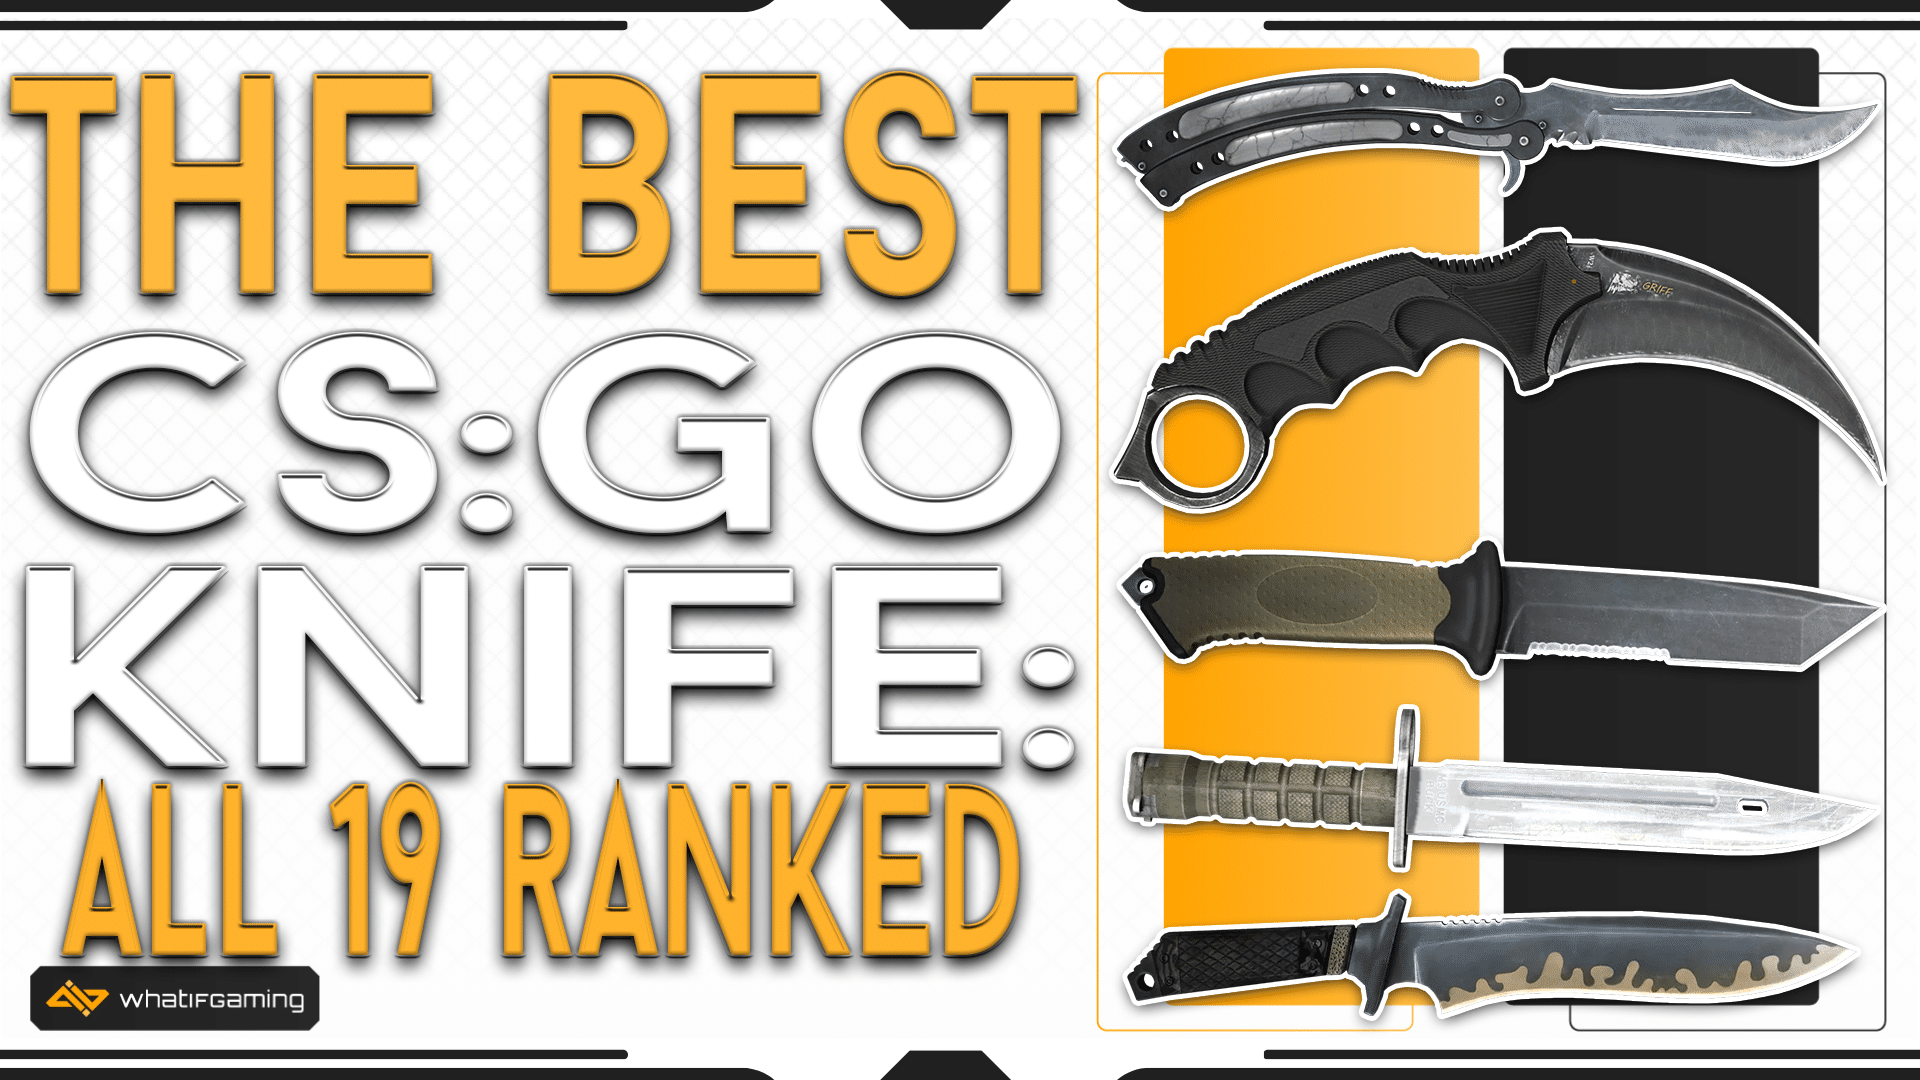 The Best CS:GO Knife: ALL Knives Ranked in